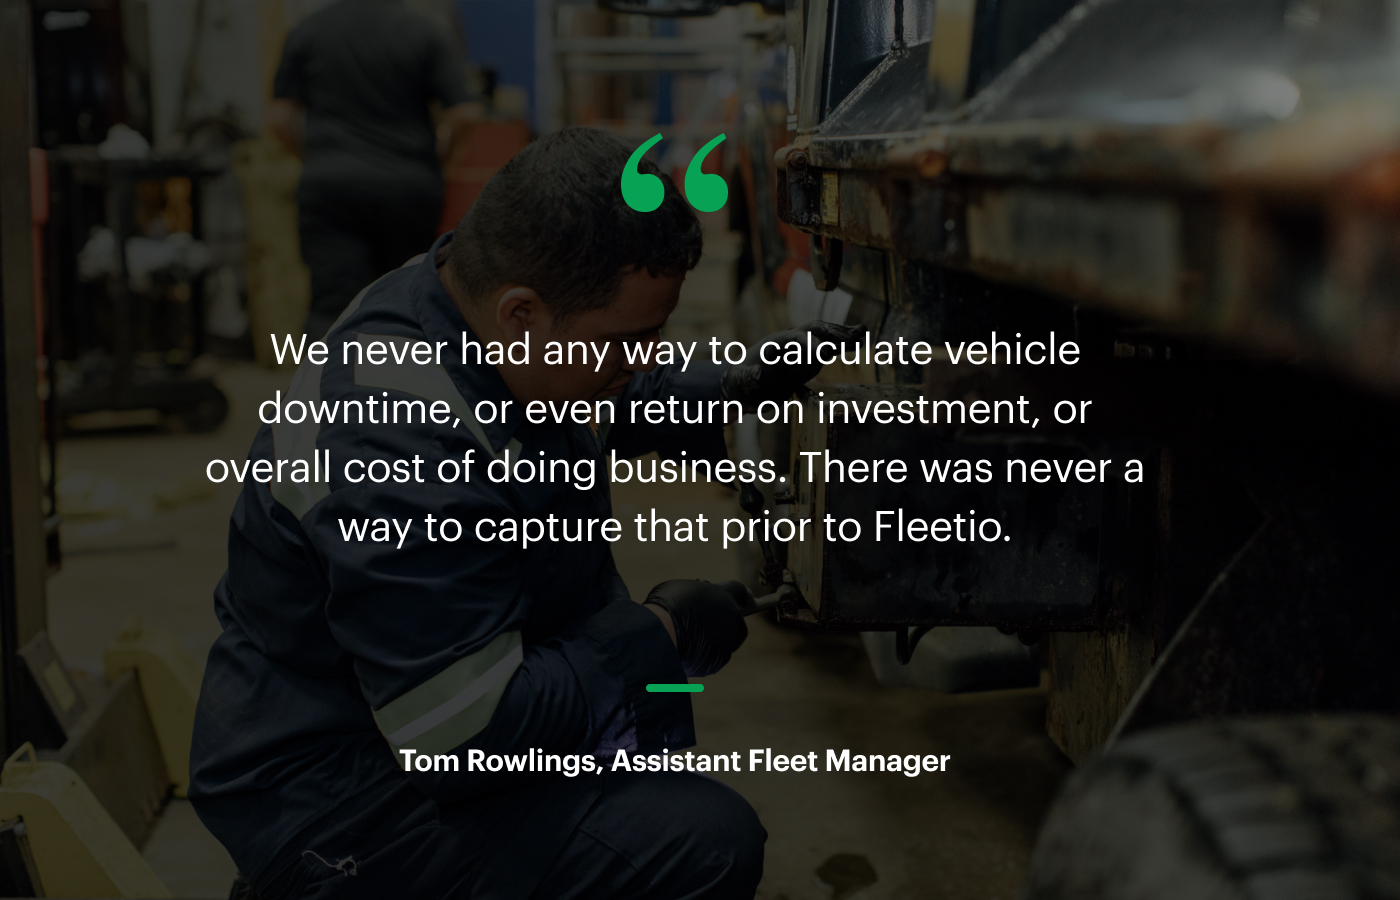 “We never had any way to calculate vehicle downtime, or even return on investment, or overall cost of doing business. There was never a way to capture that prior to Fleetio.” – Tom Rowlings, Assistant Fleet Manager